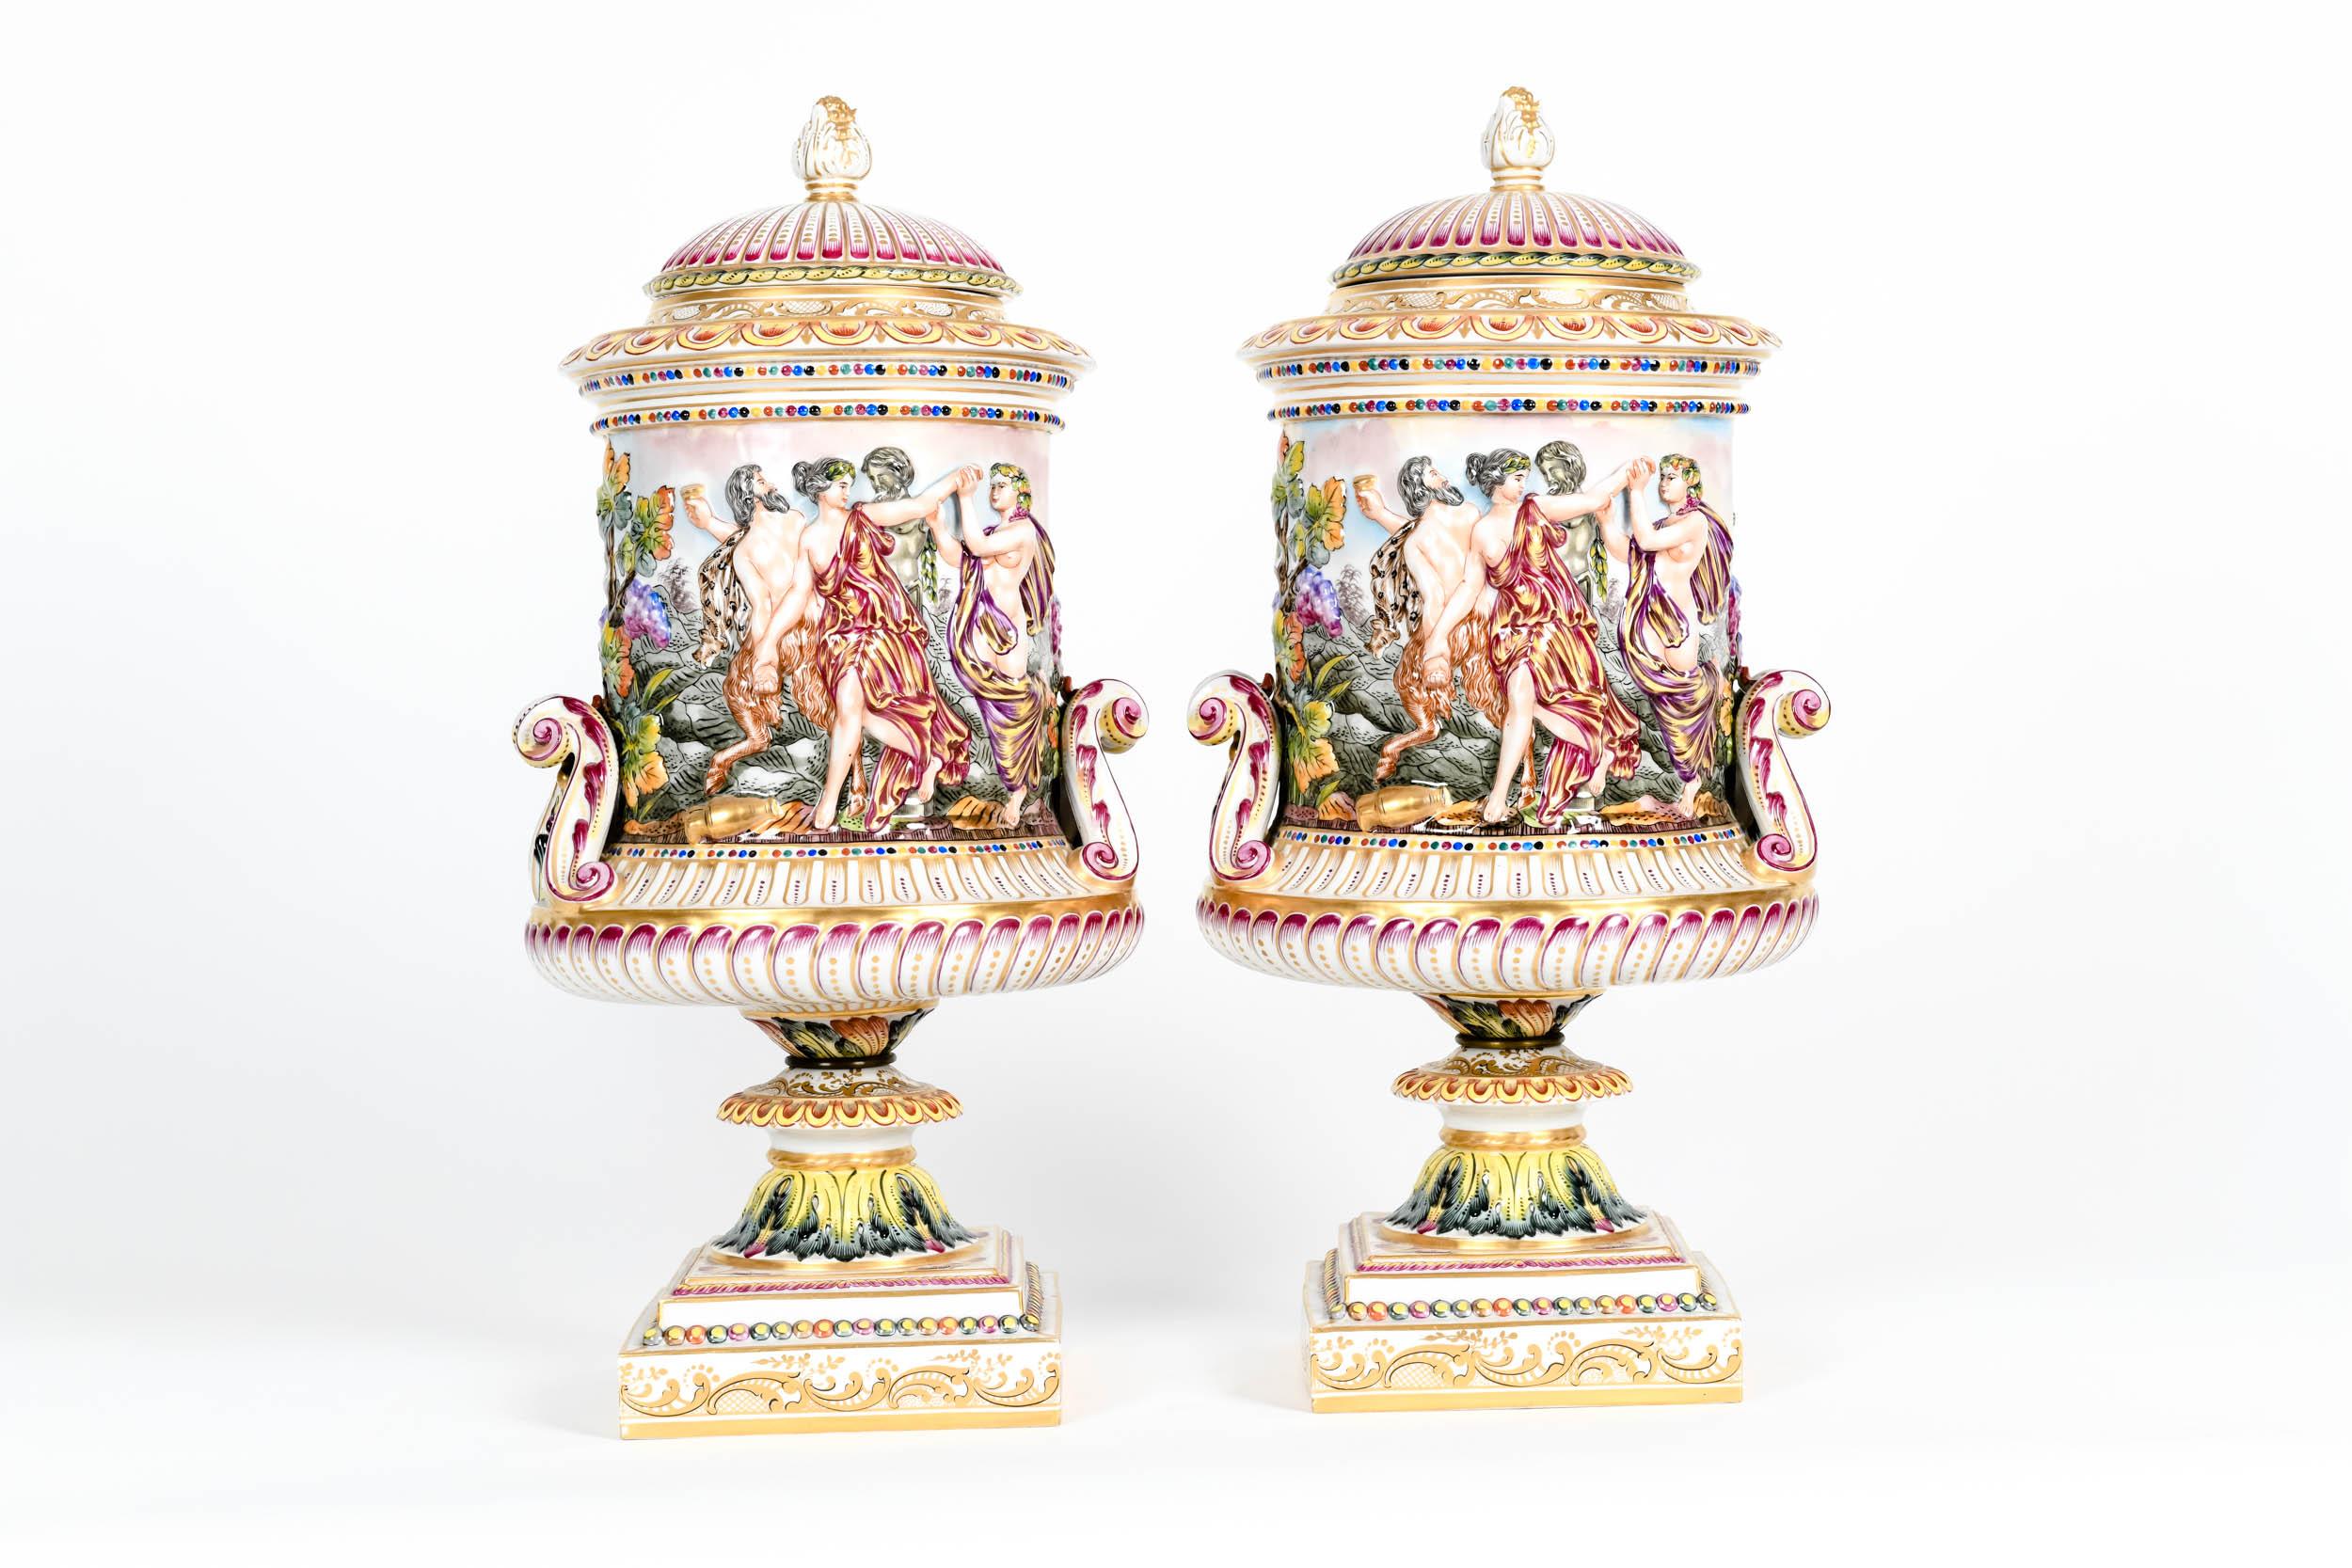 Late 19th Century Large Pair of Porcelain Covered Urns / Decorative Pieces